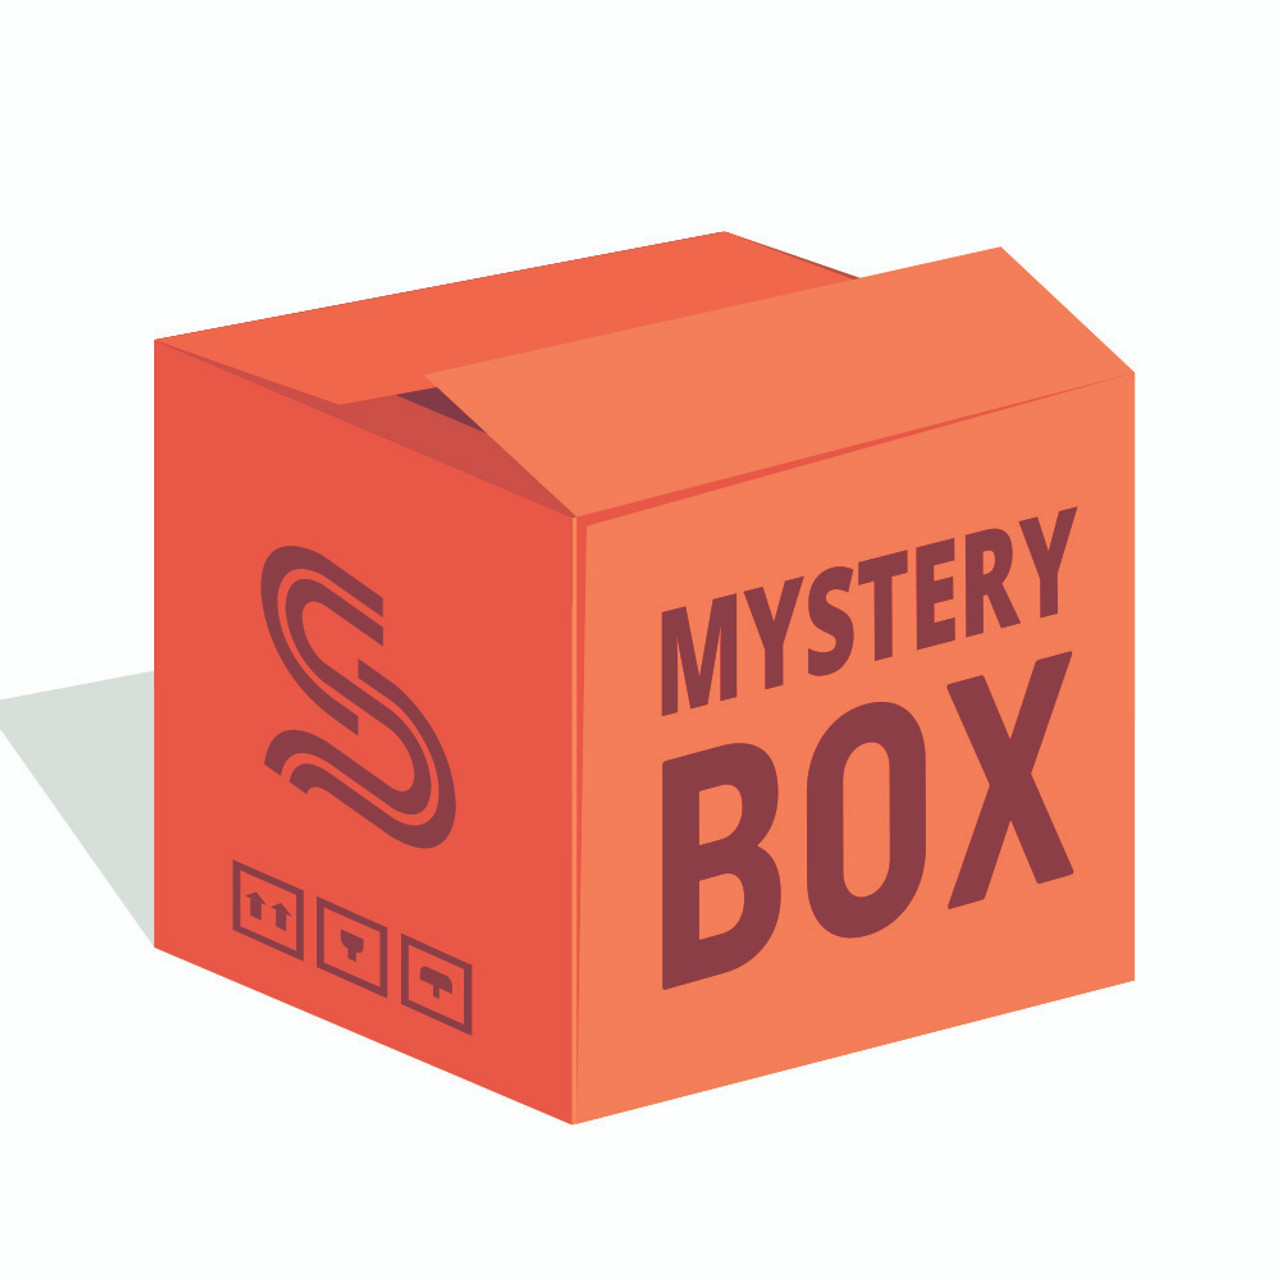 https://cdn11.bigcommerce.com/s-p6270ymd/images/stencil/1280x1280/products/14491/121911/mystery_box_thumnail_orange__10519.1655729825.jpg?c=2